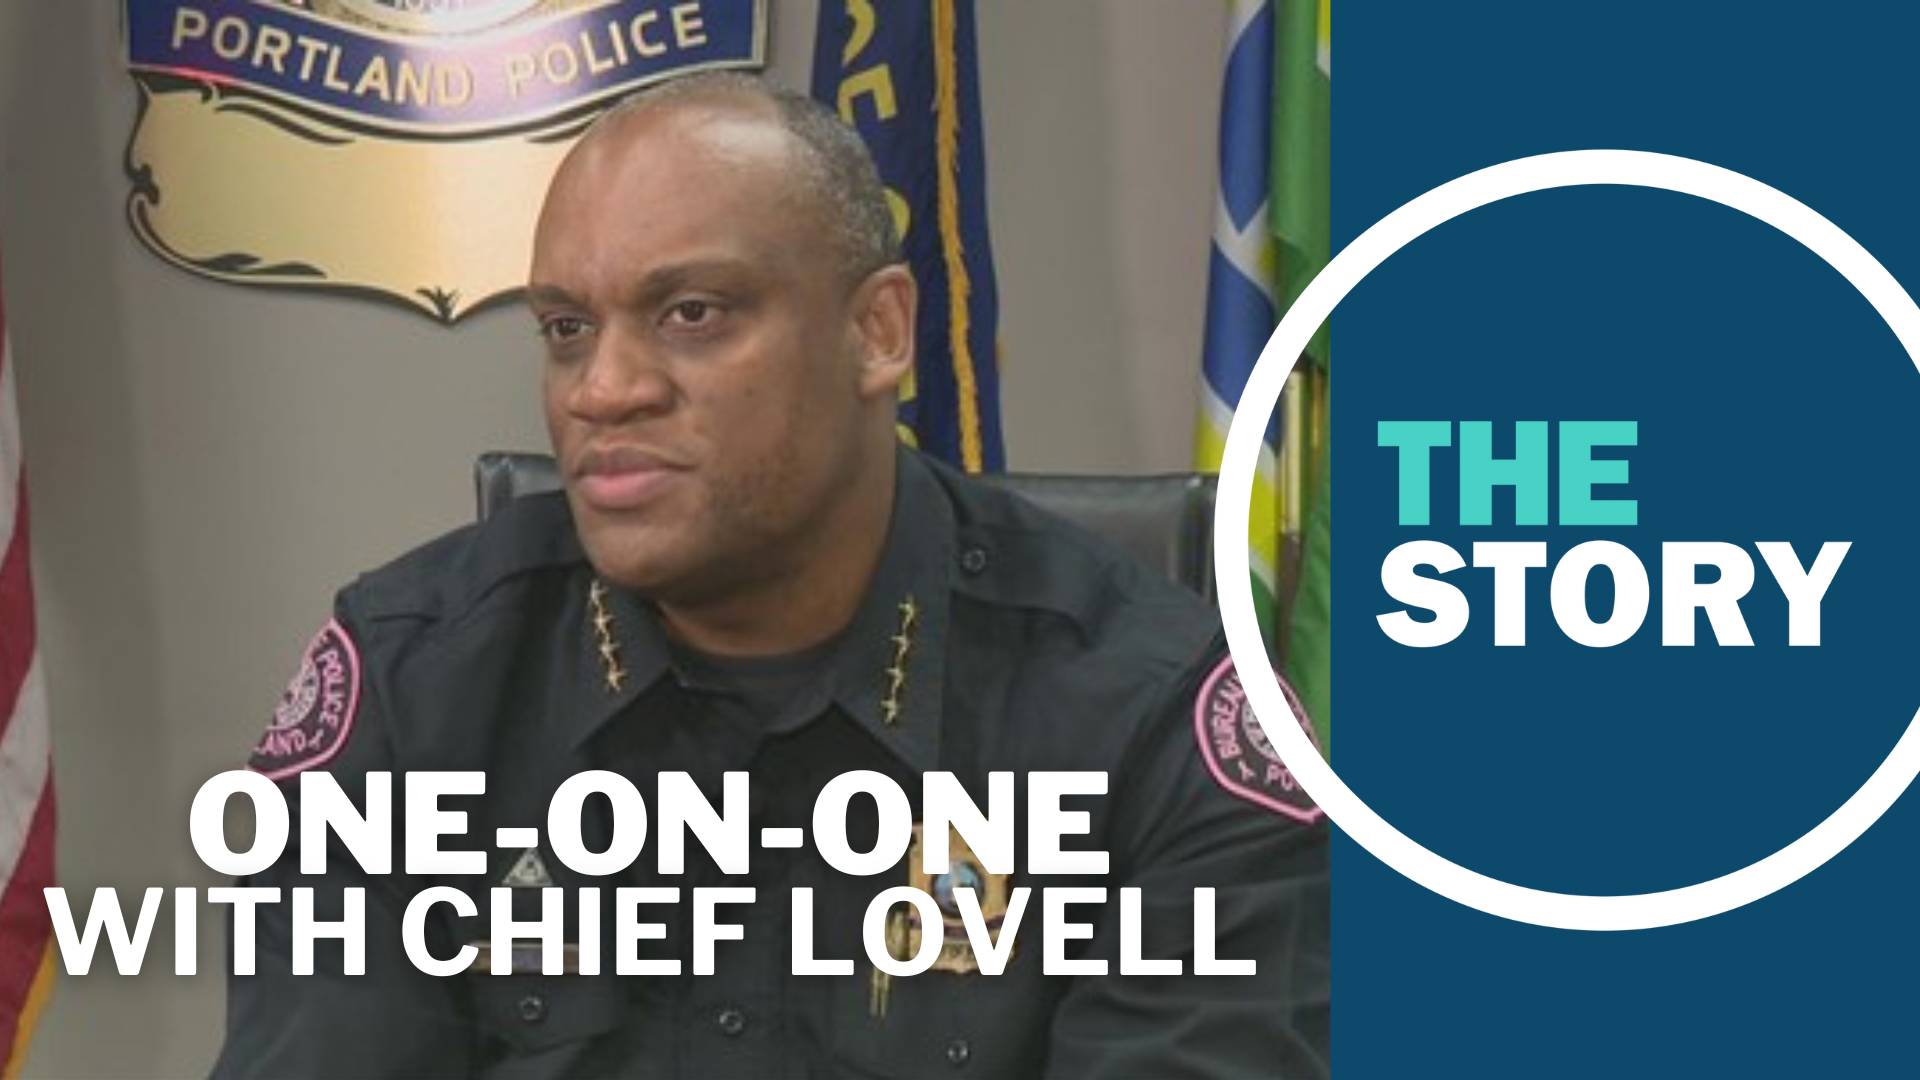 In a one-on-one interview, Lovell gave his responses to complaints about the lack of police response to certain crimes and efforts to investigate gun violence.